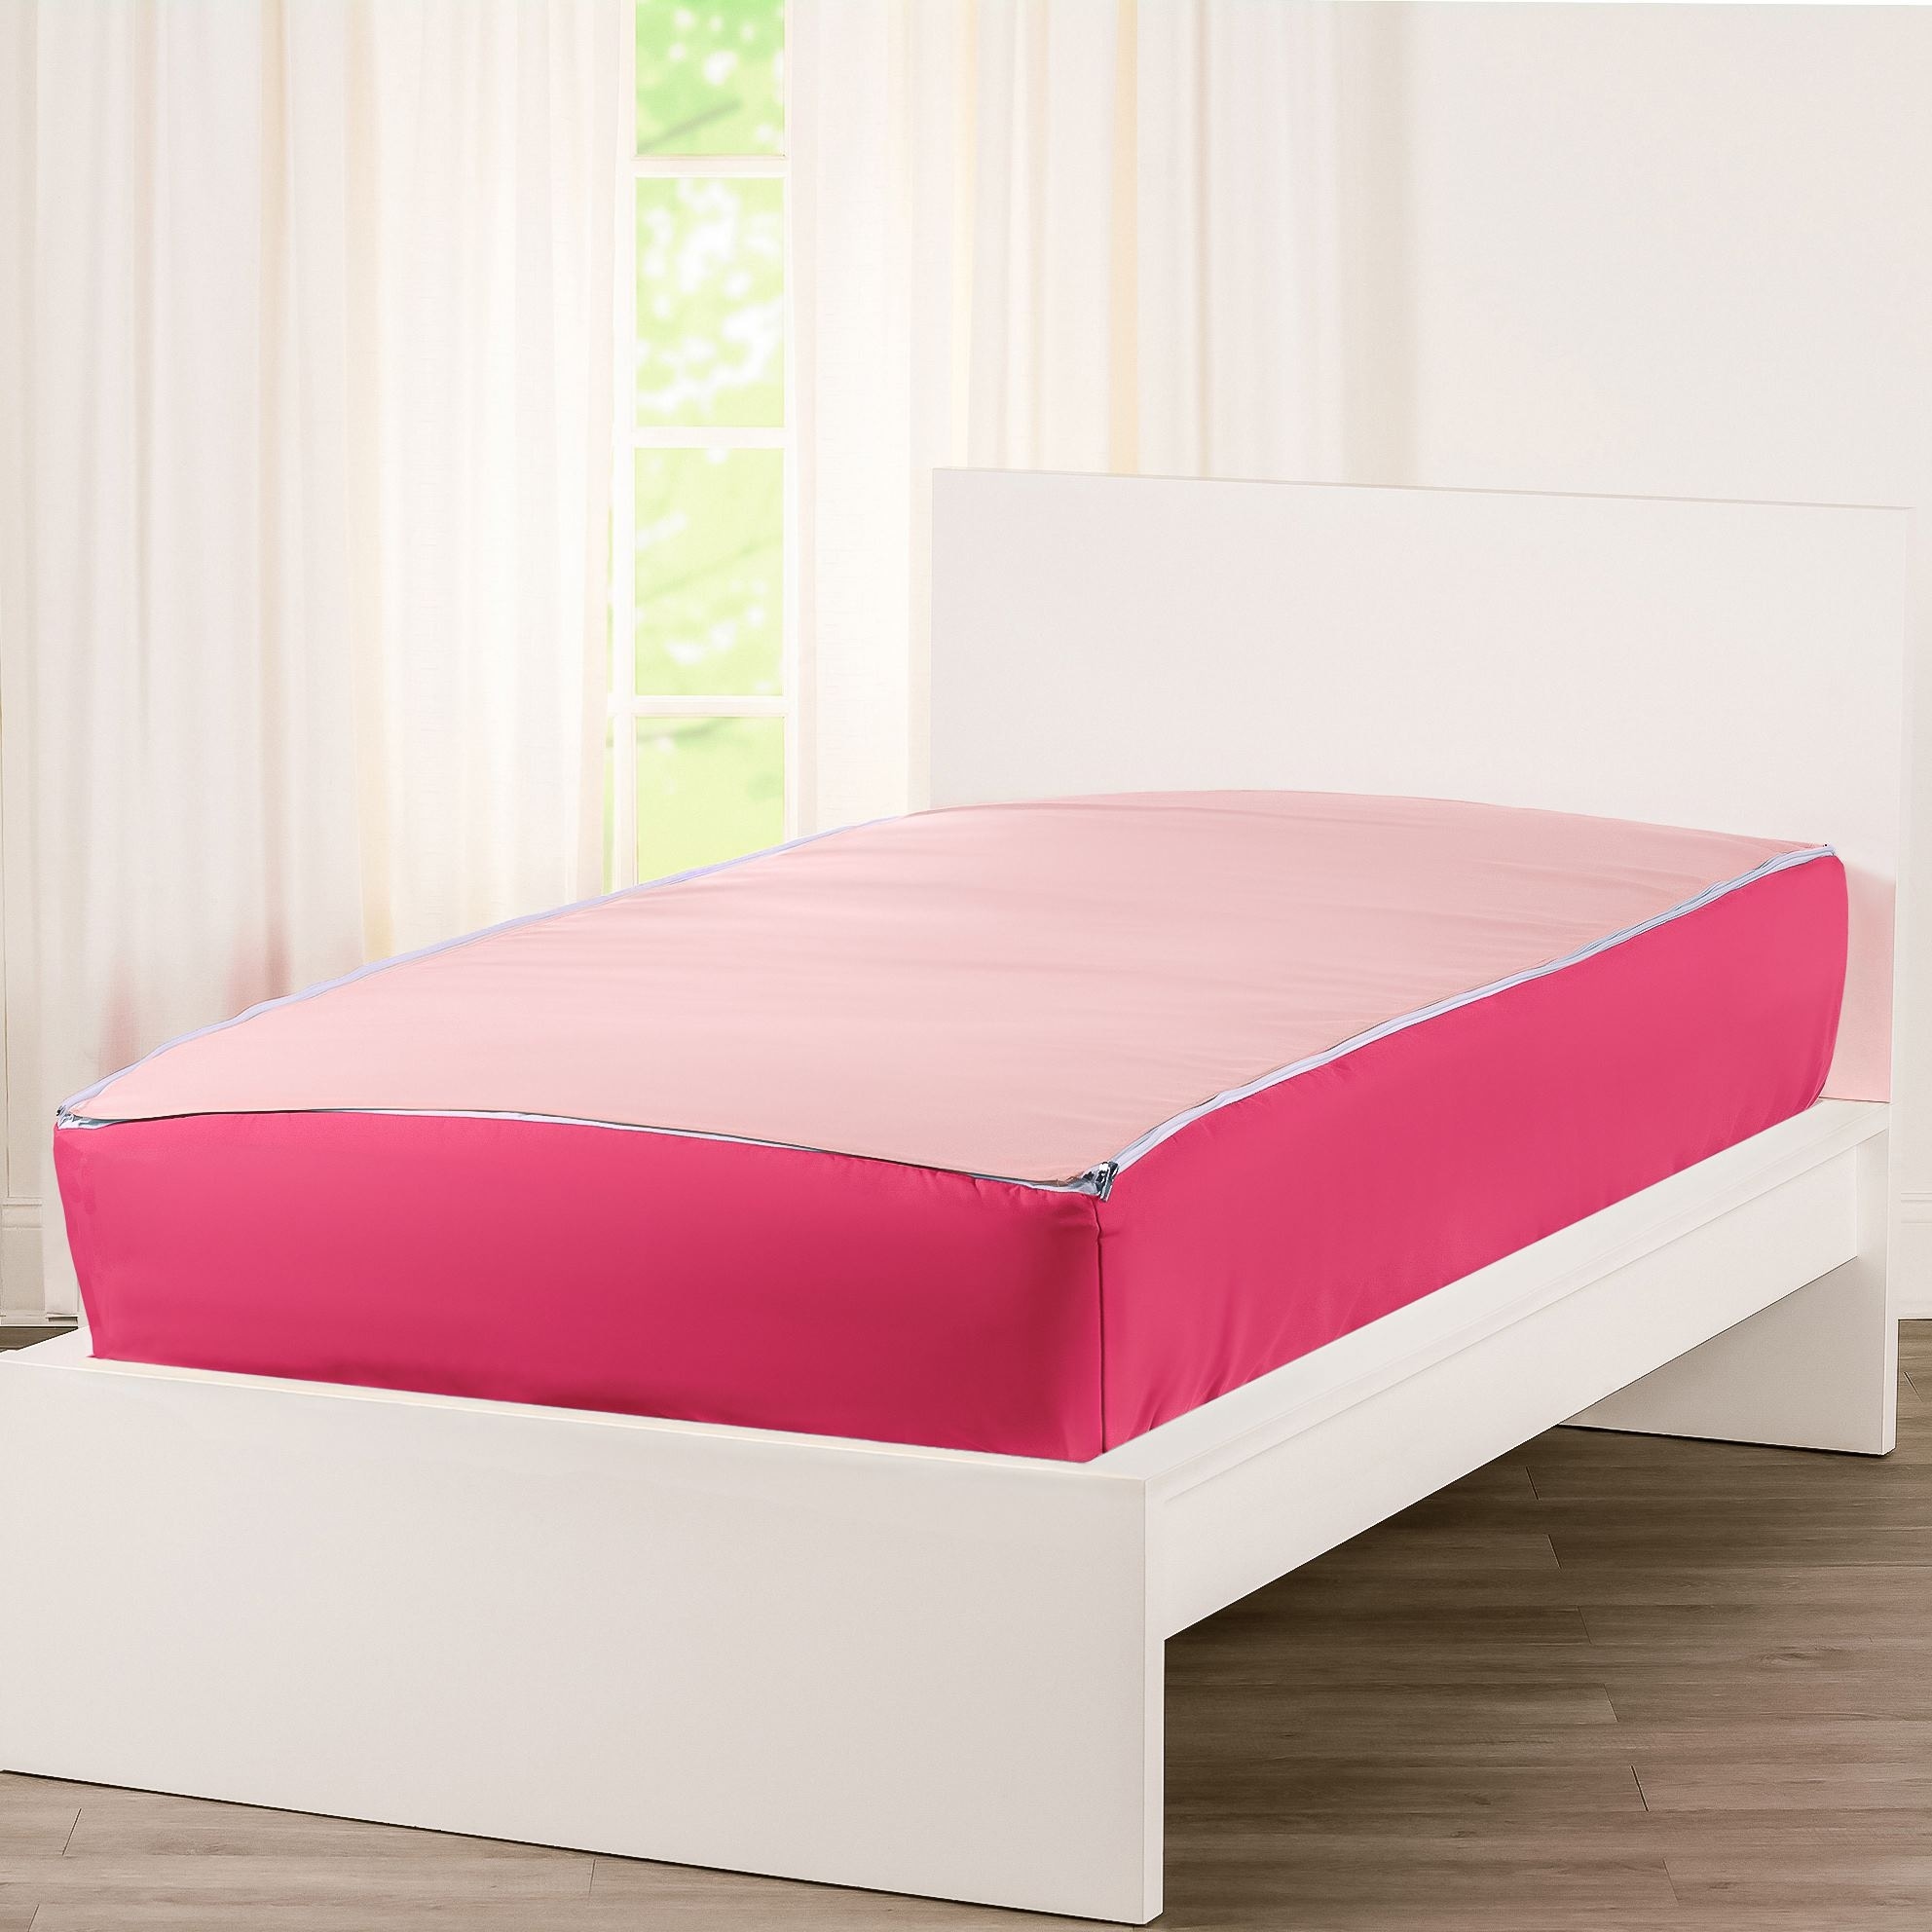 https://ak1.ostkcdn.com/images/products/is/images/direct/bf65ccf001708a46d0eb726516d20105d0271b6f/Siscovers-Hot-Pink-Bunkie-Deluxe-Zipper-Bedding-Set.jpg